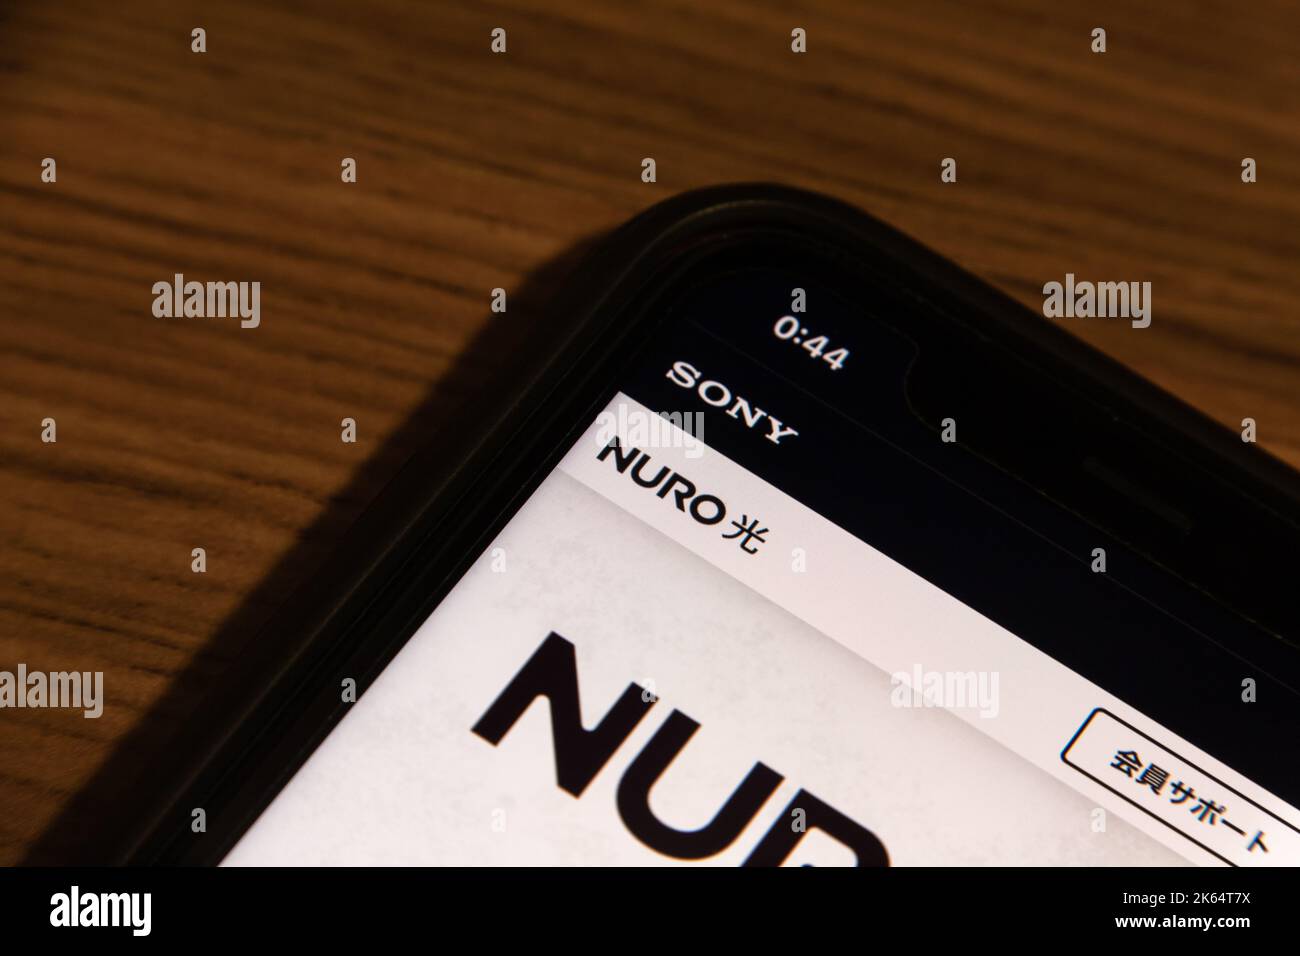 Vancouver, CANADA - Oct 11 2022 : Closeup logo of NURO Hikari, a Japanese fiber-optic ISP supplied by SONY Group, on its website on an iPhone. Stock Photo